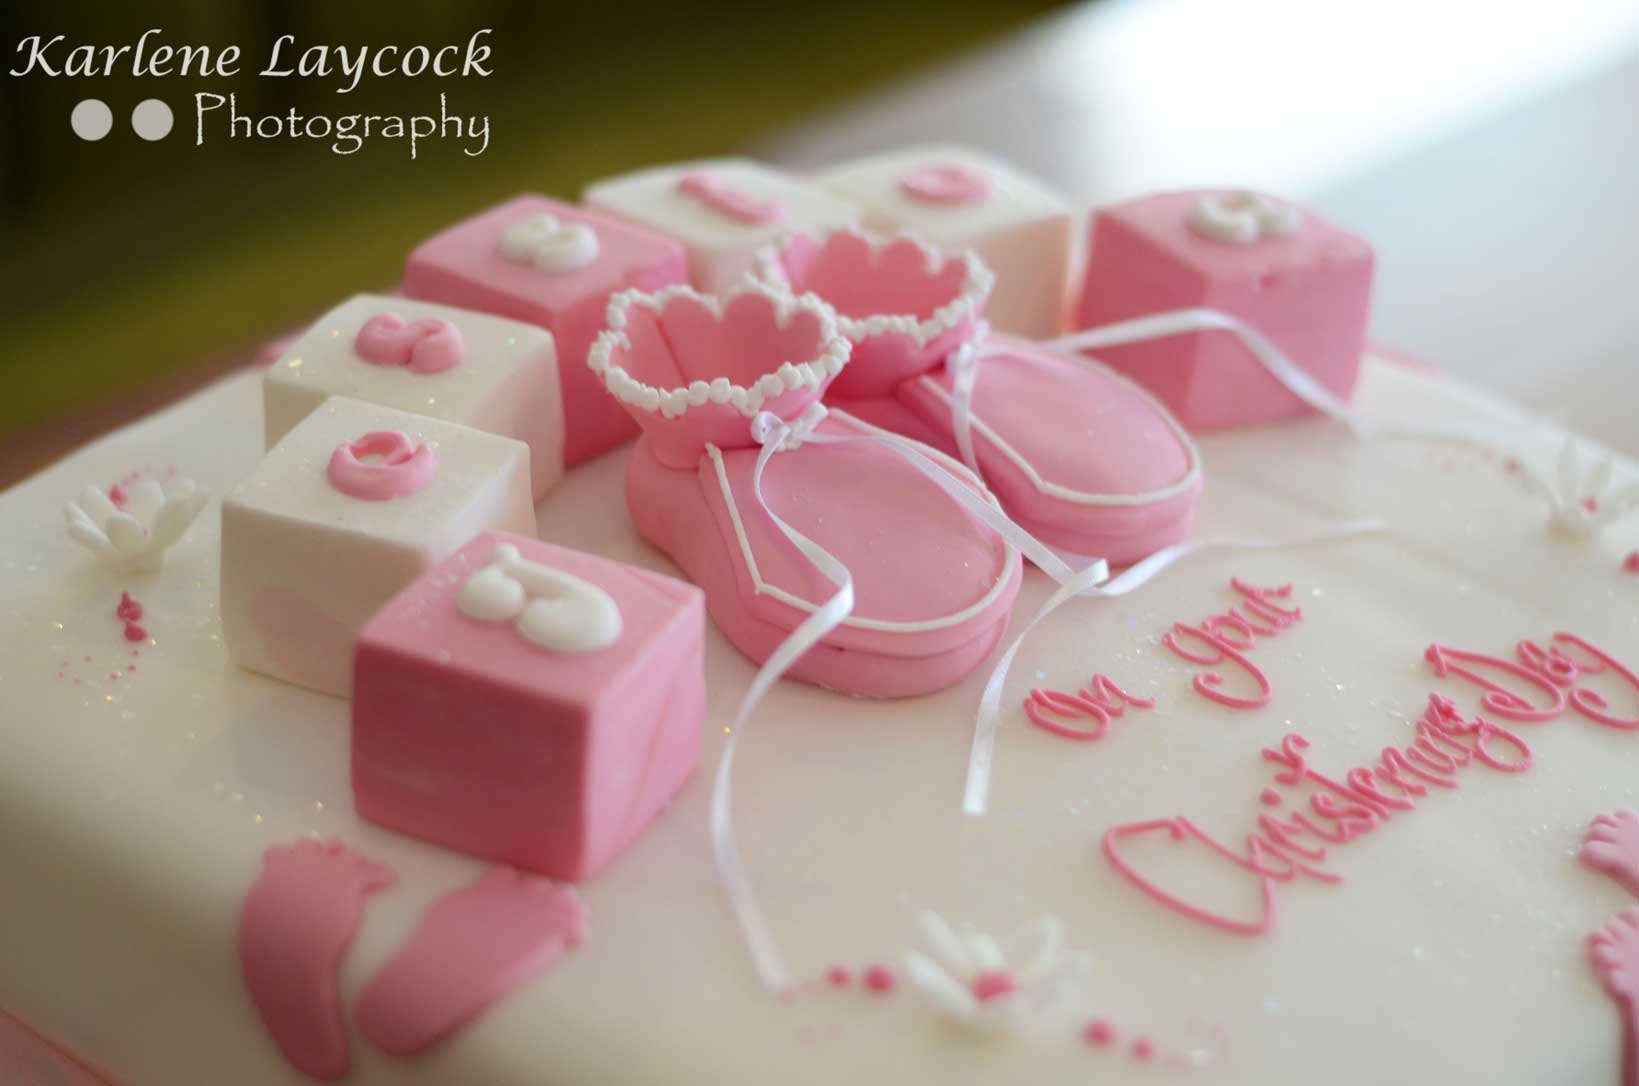 Photograph of a Pink Christening Cake with Booties and Building Blocks